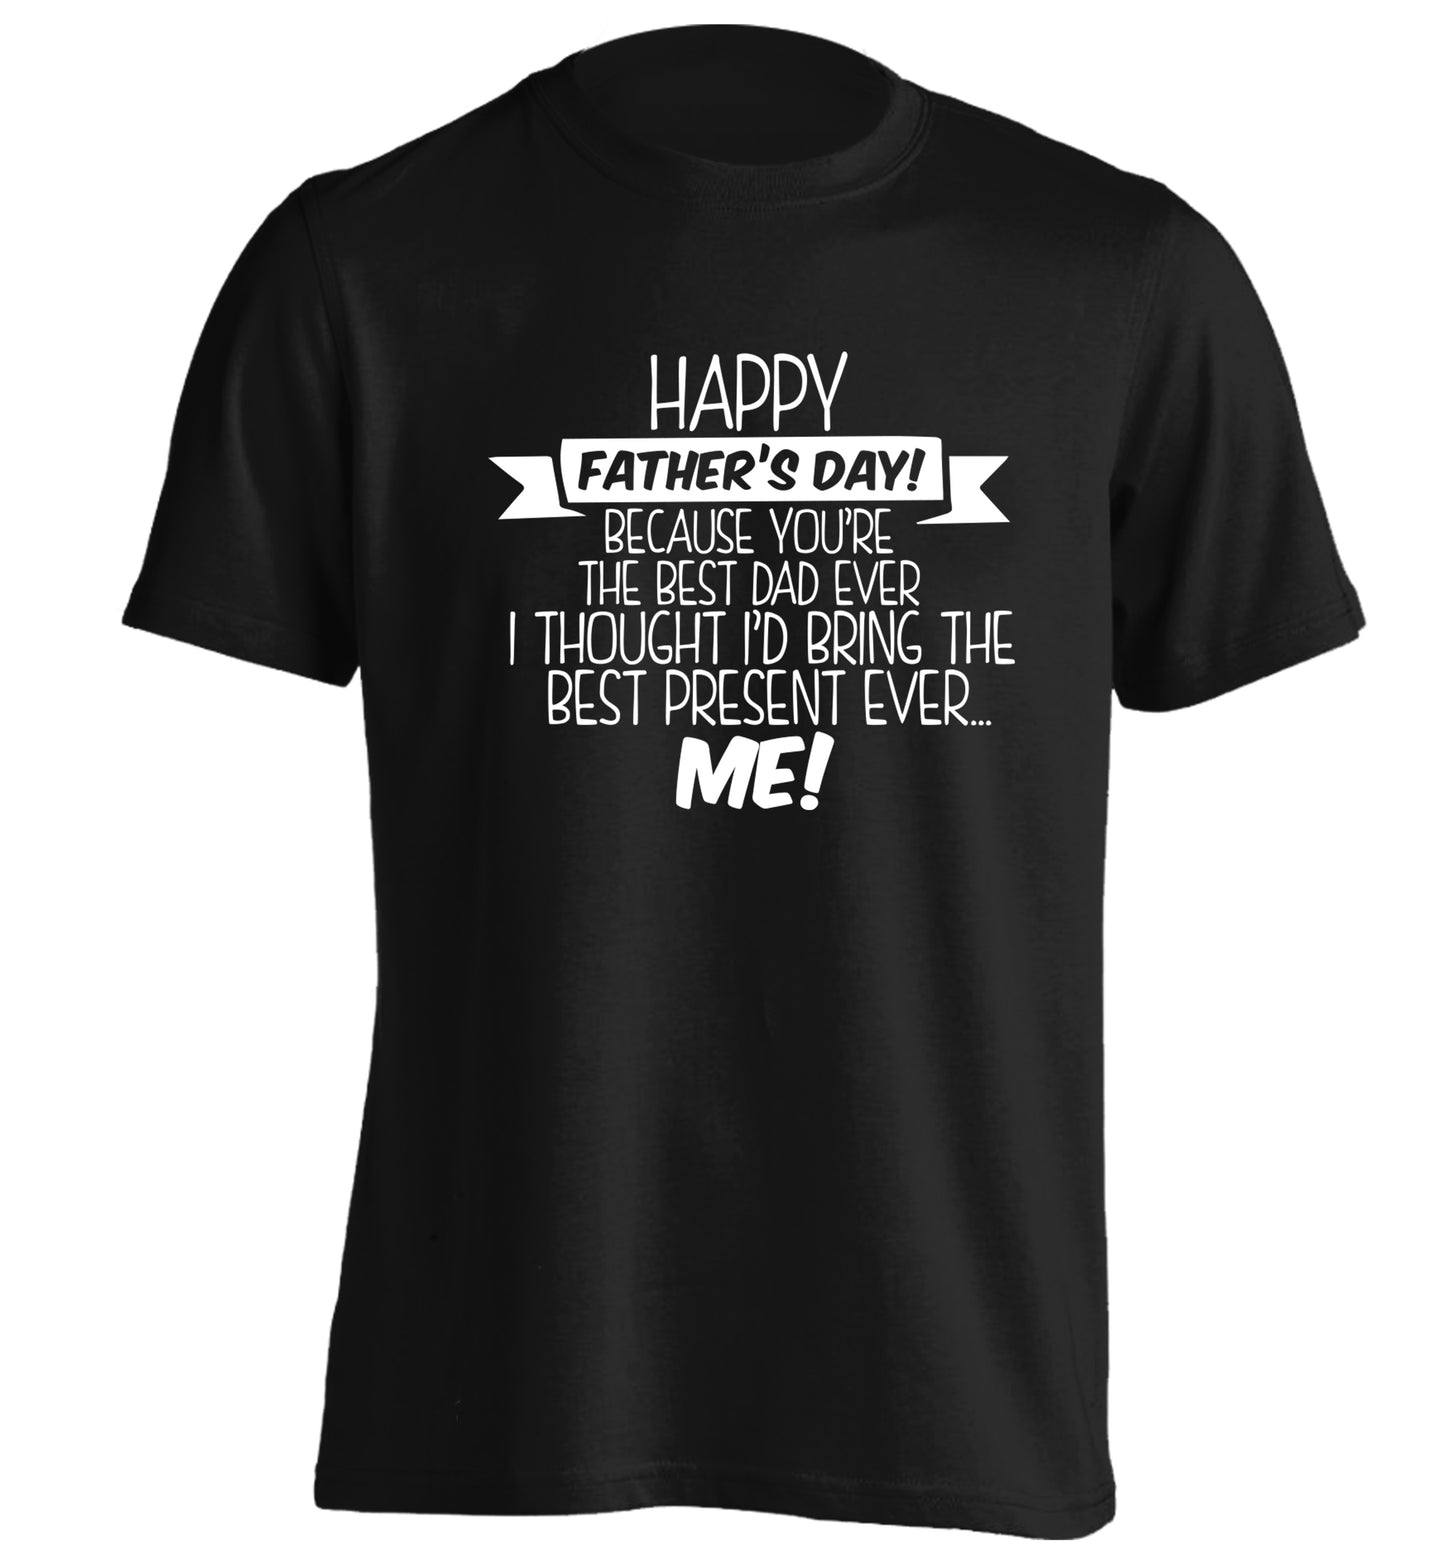 Happy Father's day, because you're the best dad ever I thought I'd bring the best present ever...me! adults unisex black Tshirt 2XL